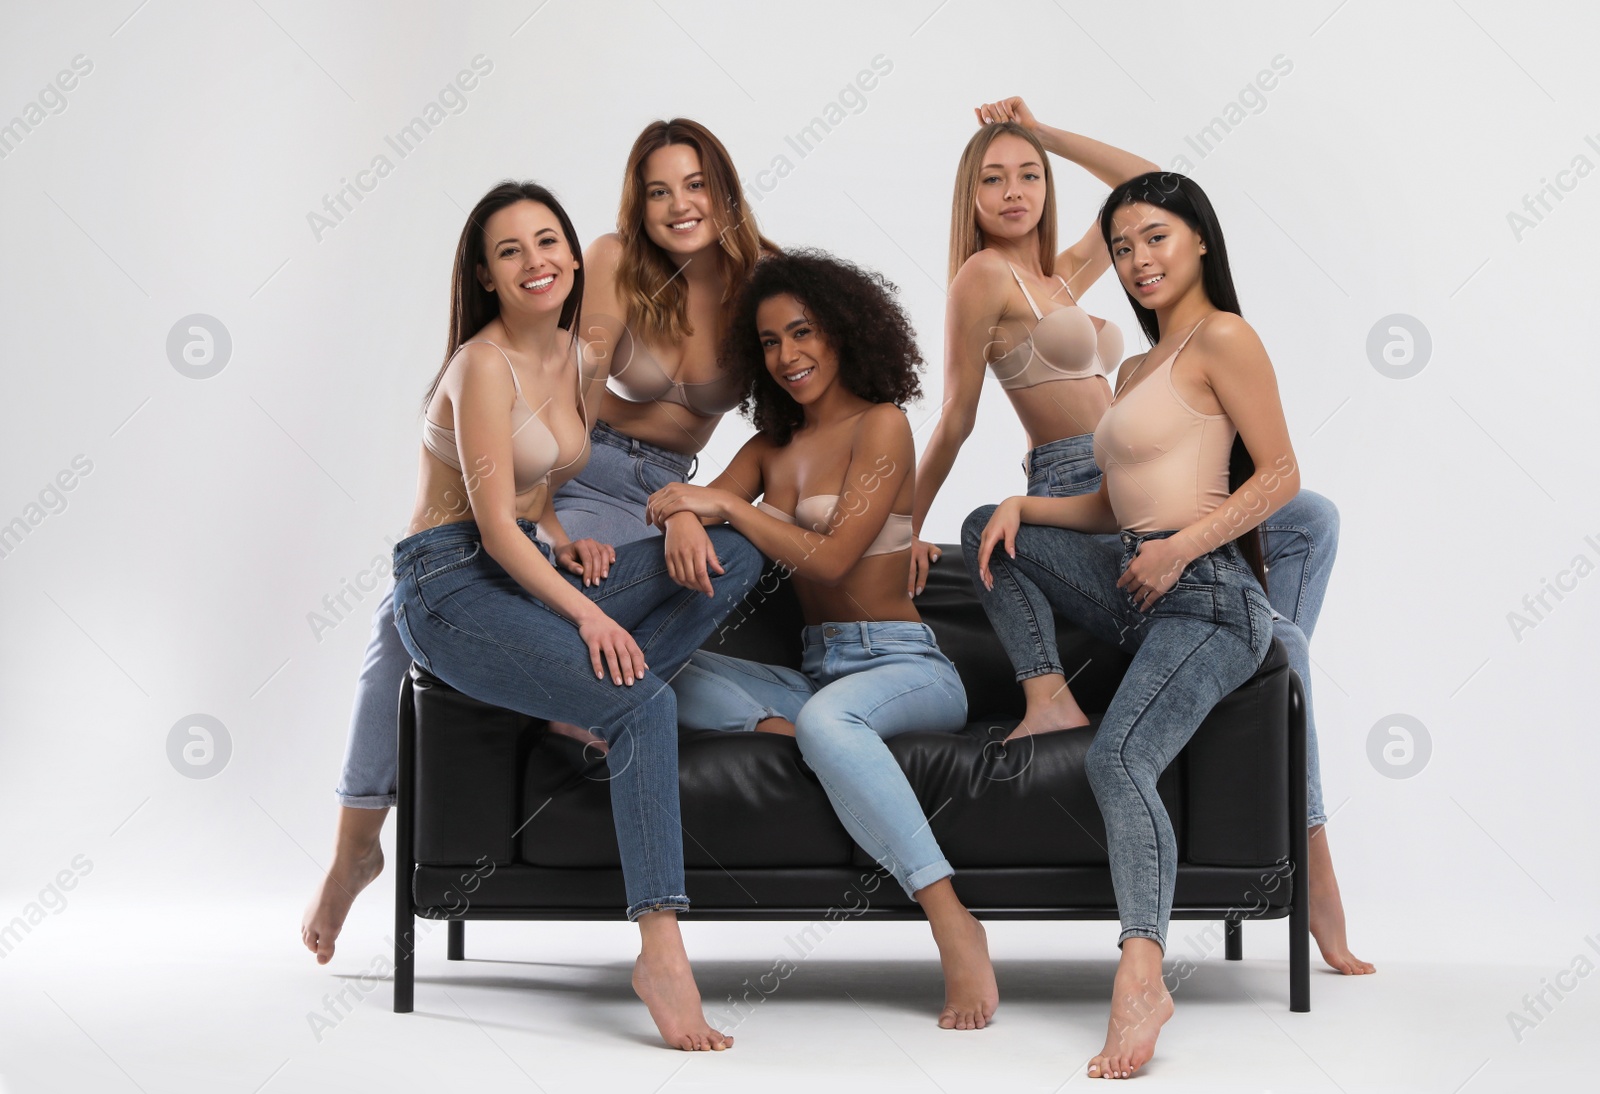 Photo of Group of women with different body types in jeans and underwear on sofa against light background